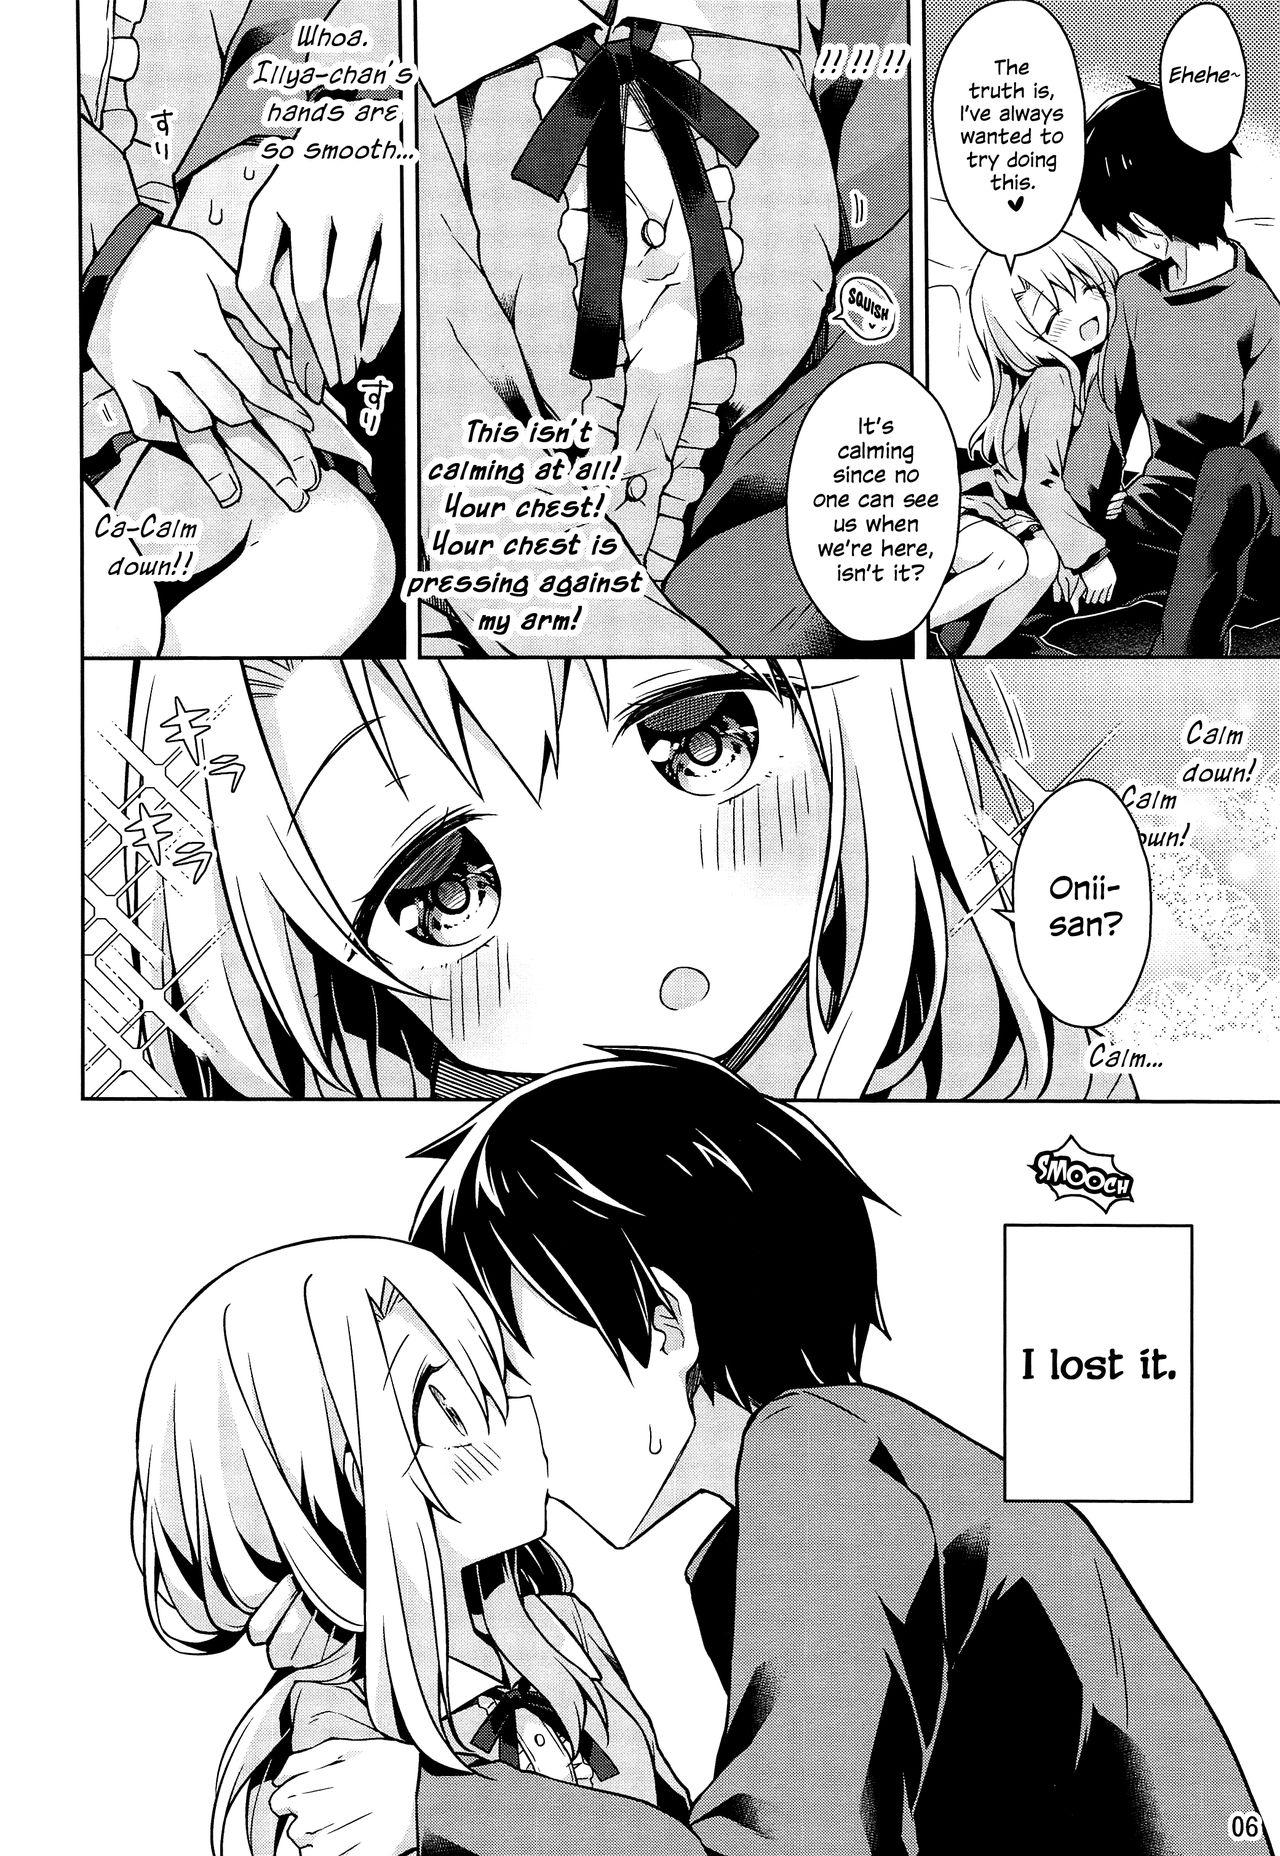 Nudity Illya to Ouchi de Ecchi Shitai!! | I Want To Make Love With Illya At My Place!! - Fate kaleid liner prisma illya Dancing - Page 7